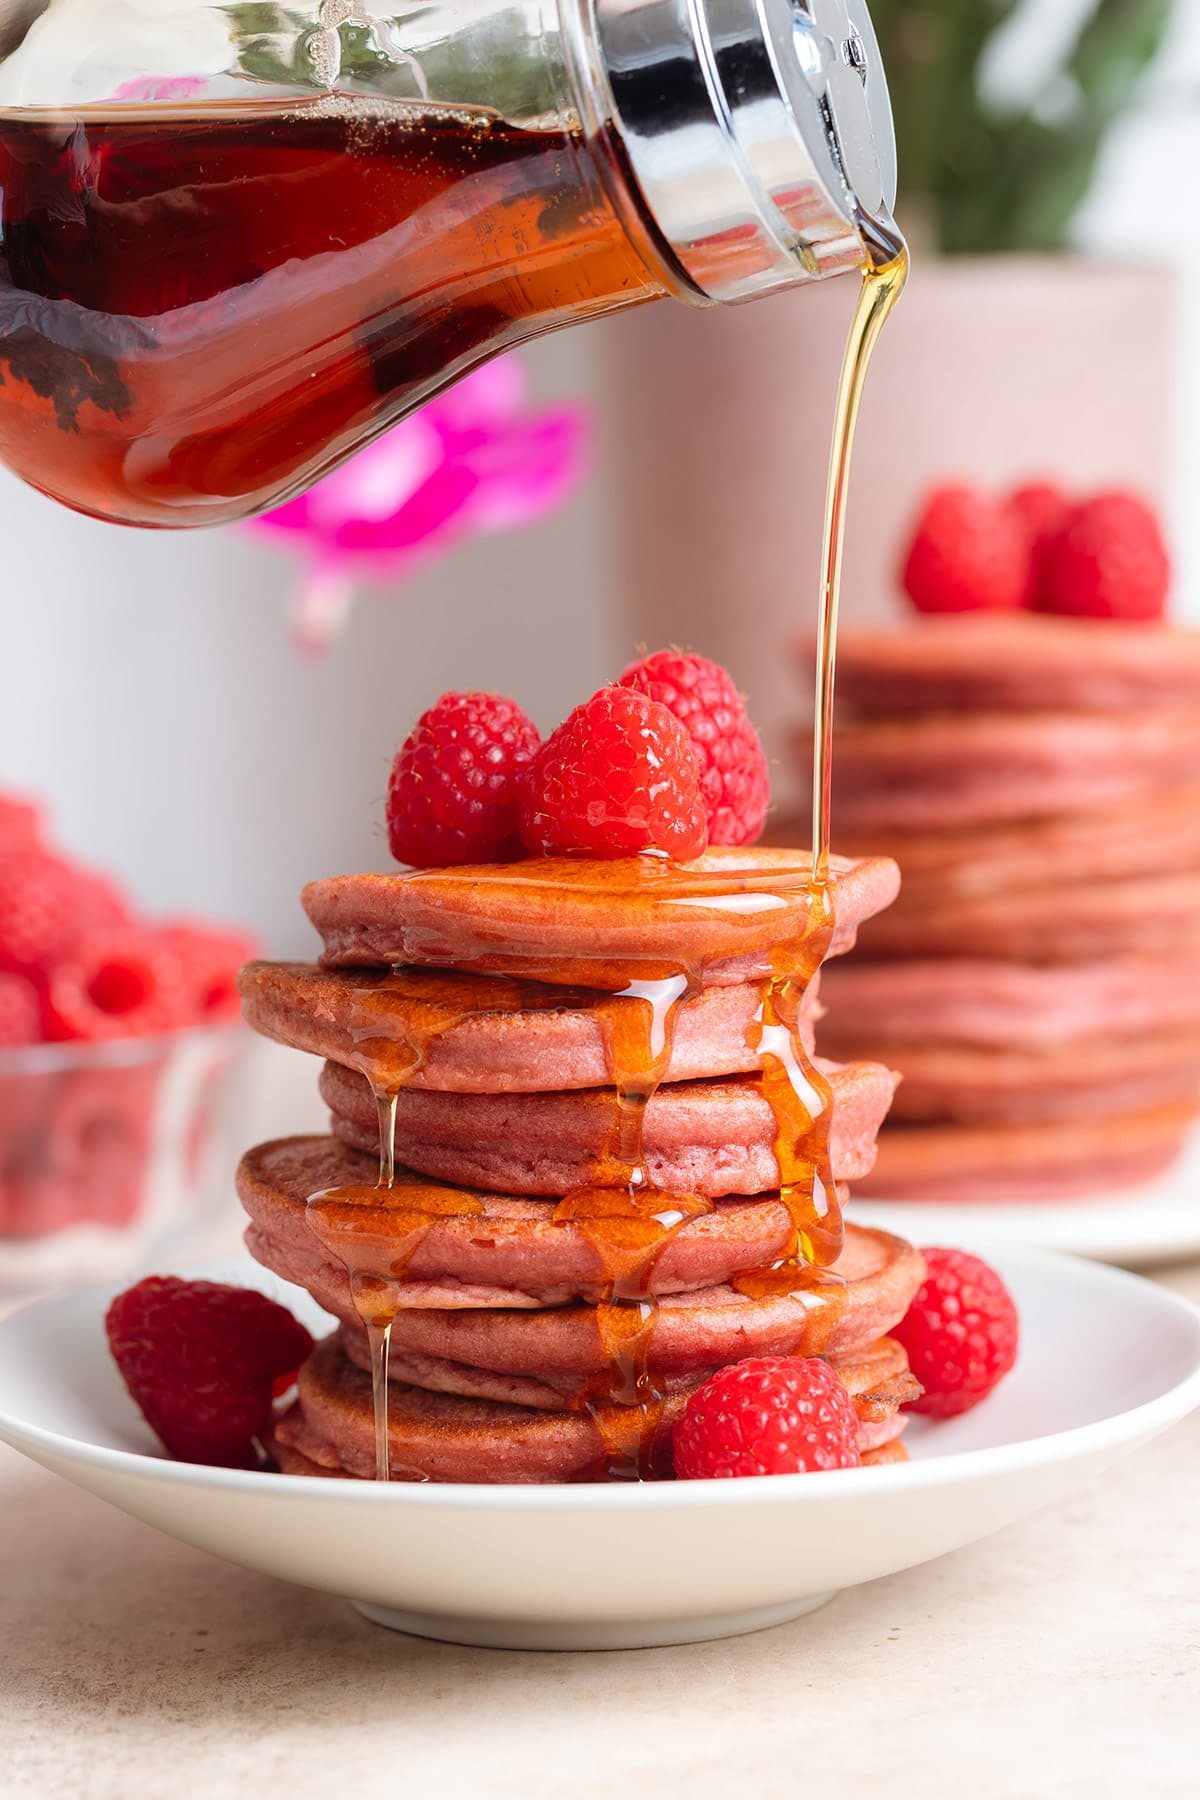 A stack of pink pancakes on a small white plate garnished with fresh raspberries and being drizzled with maple syrup.